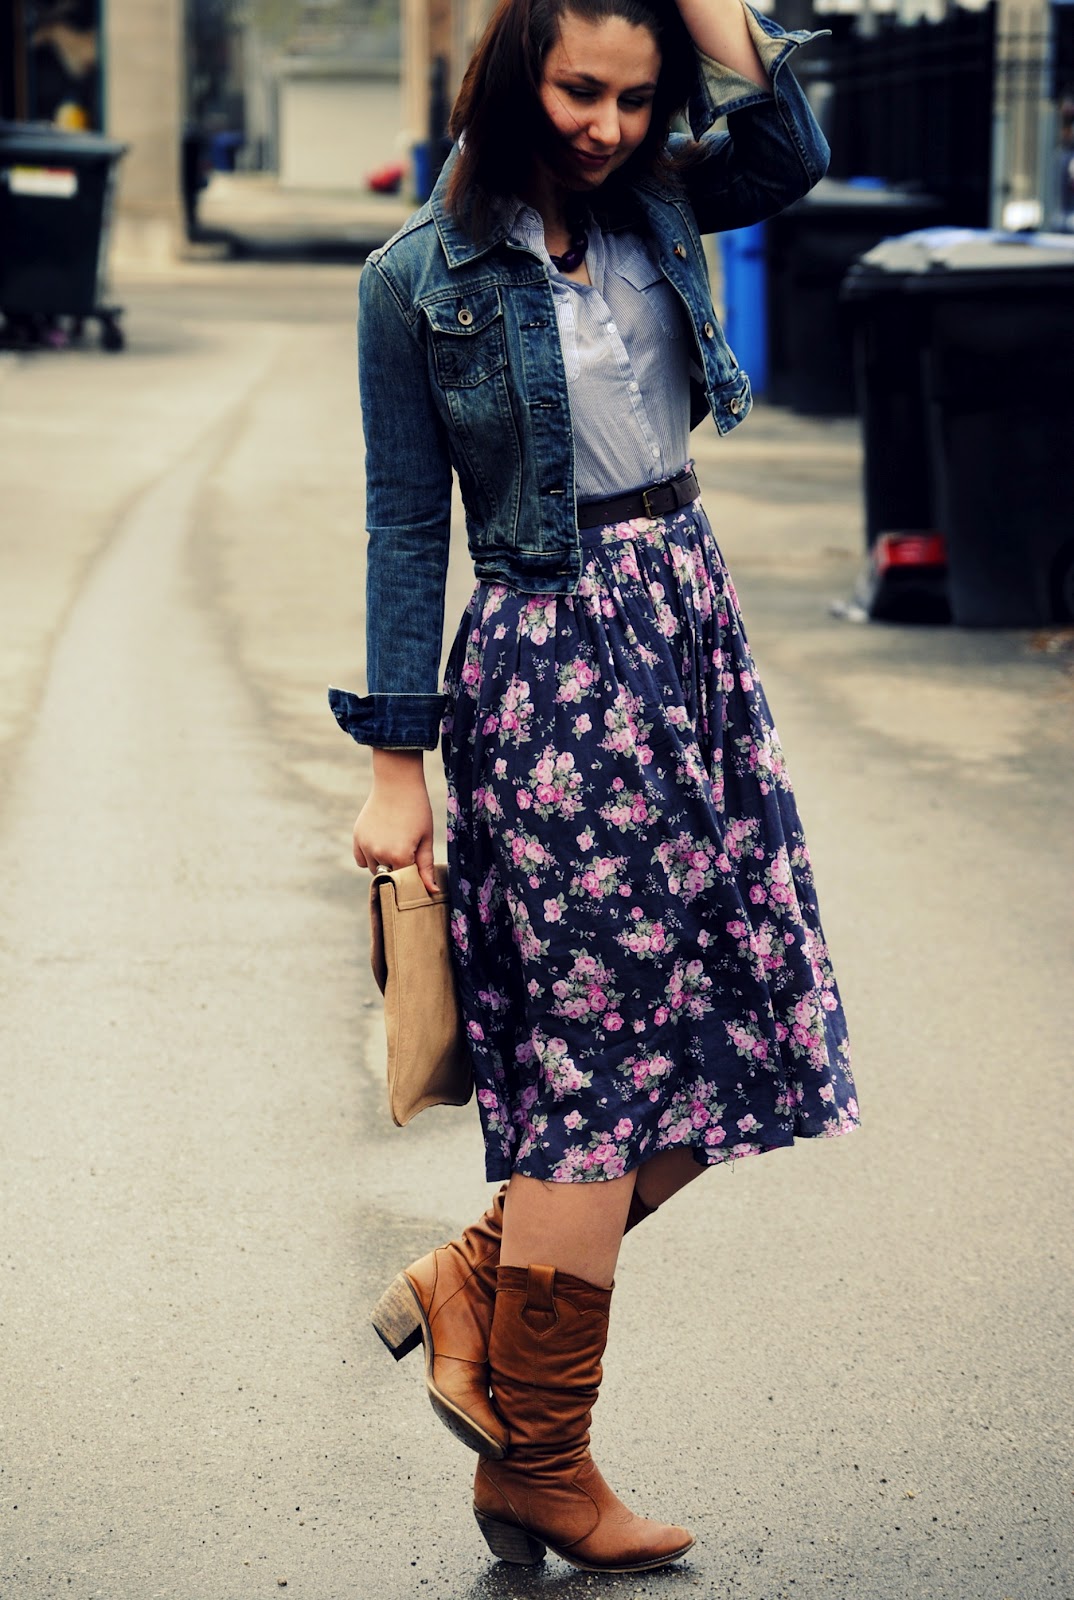 Stranger Than Vintage: What I Wore Wednesday: The Little Bit of Country ...